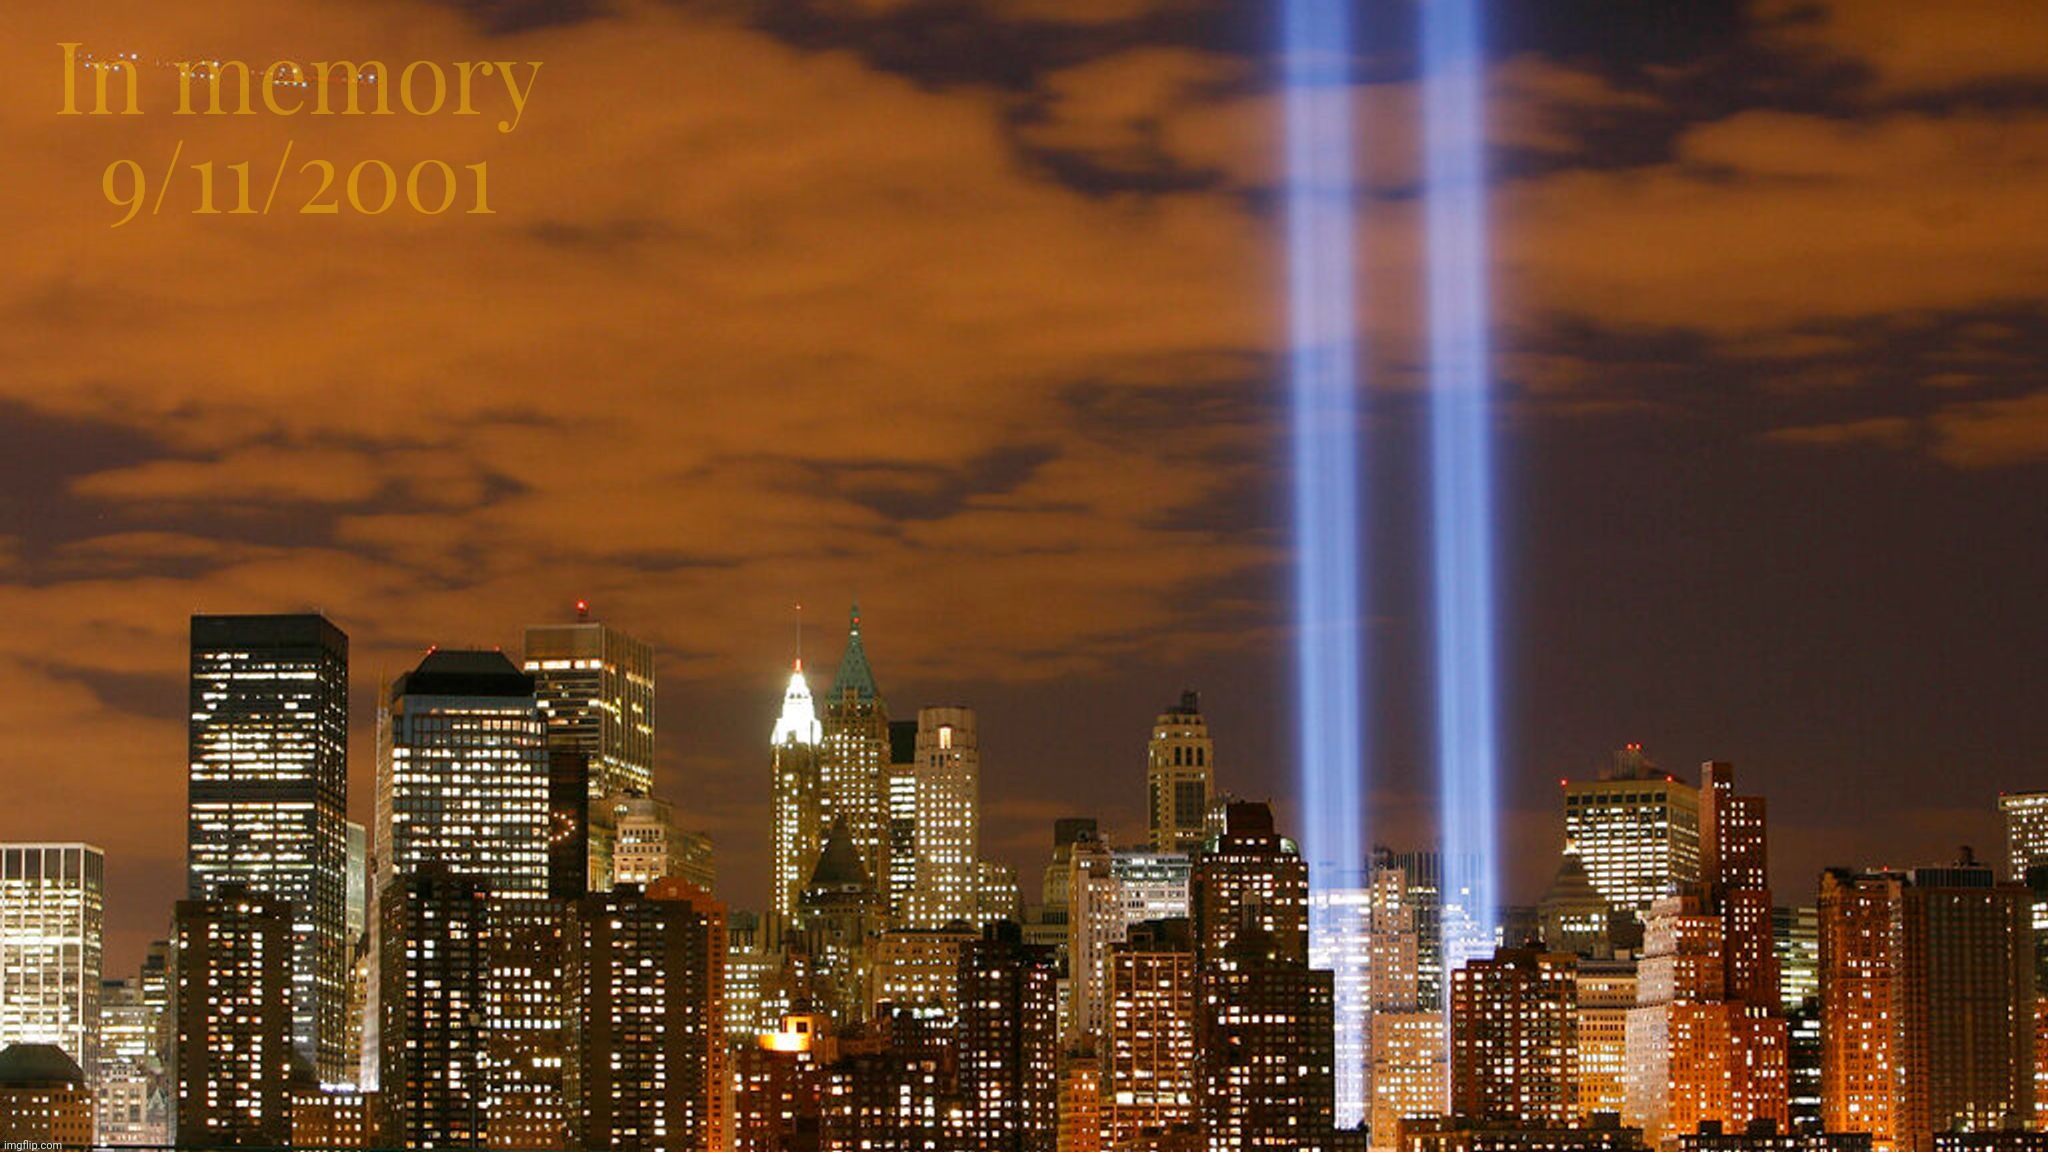 For the fallen. America stands. | In memory
9/11/2001 | image tagged in 9/11,9/11/2001,nyc,wtc,world trade center,never forget | made w/ Imgflip meme maker